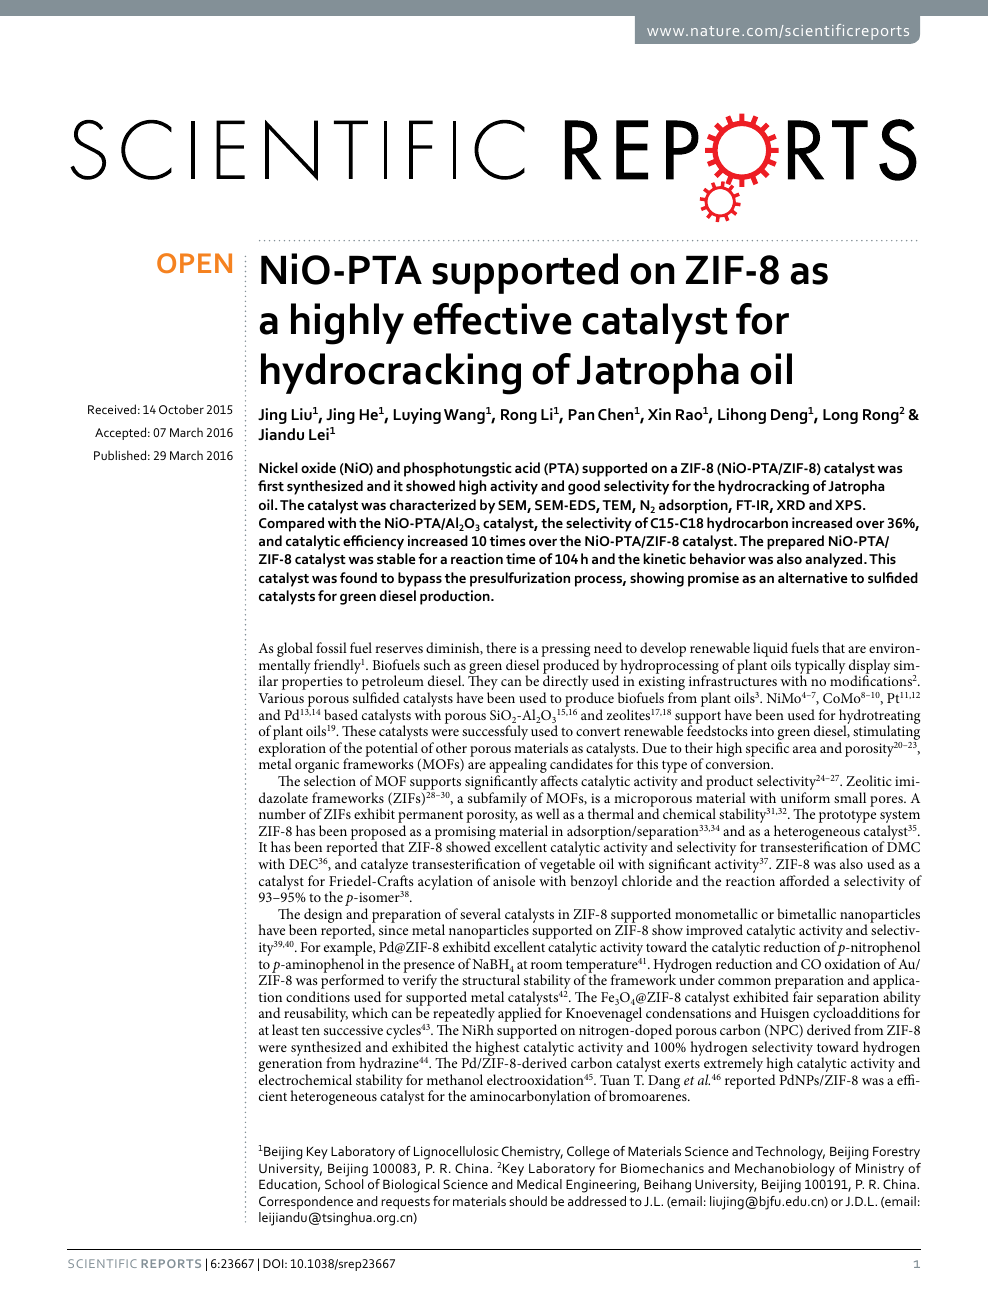 Nio Pta Supported On Zif 8 As A Highly Effective Catalyst For Hydrocracking Of Jatropha Oil Topic Of Research Paper In Chemical Sciences Download Scholarly Article Pdf And Read For Free On Cyberleninka